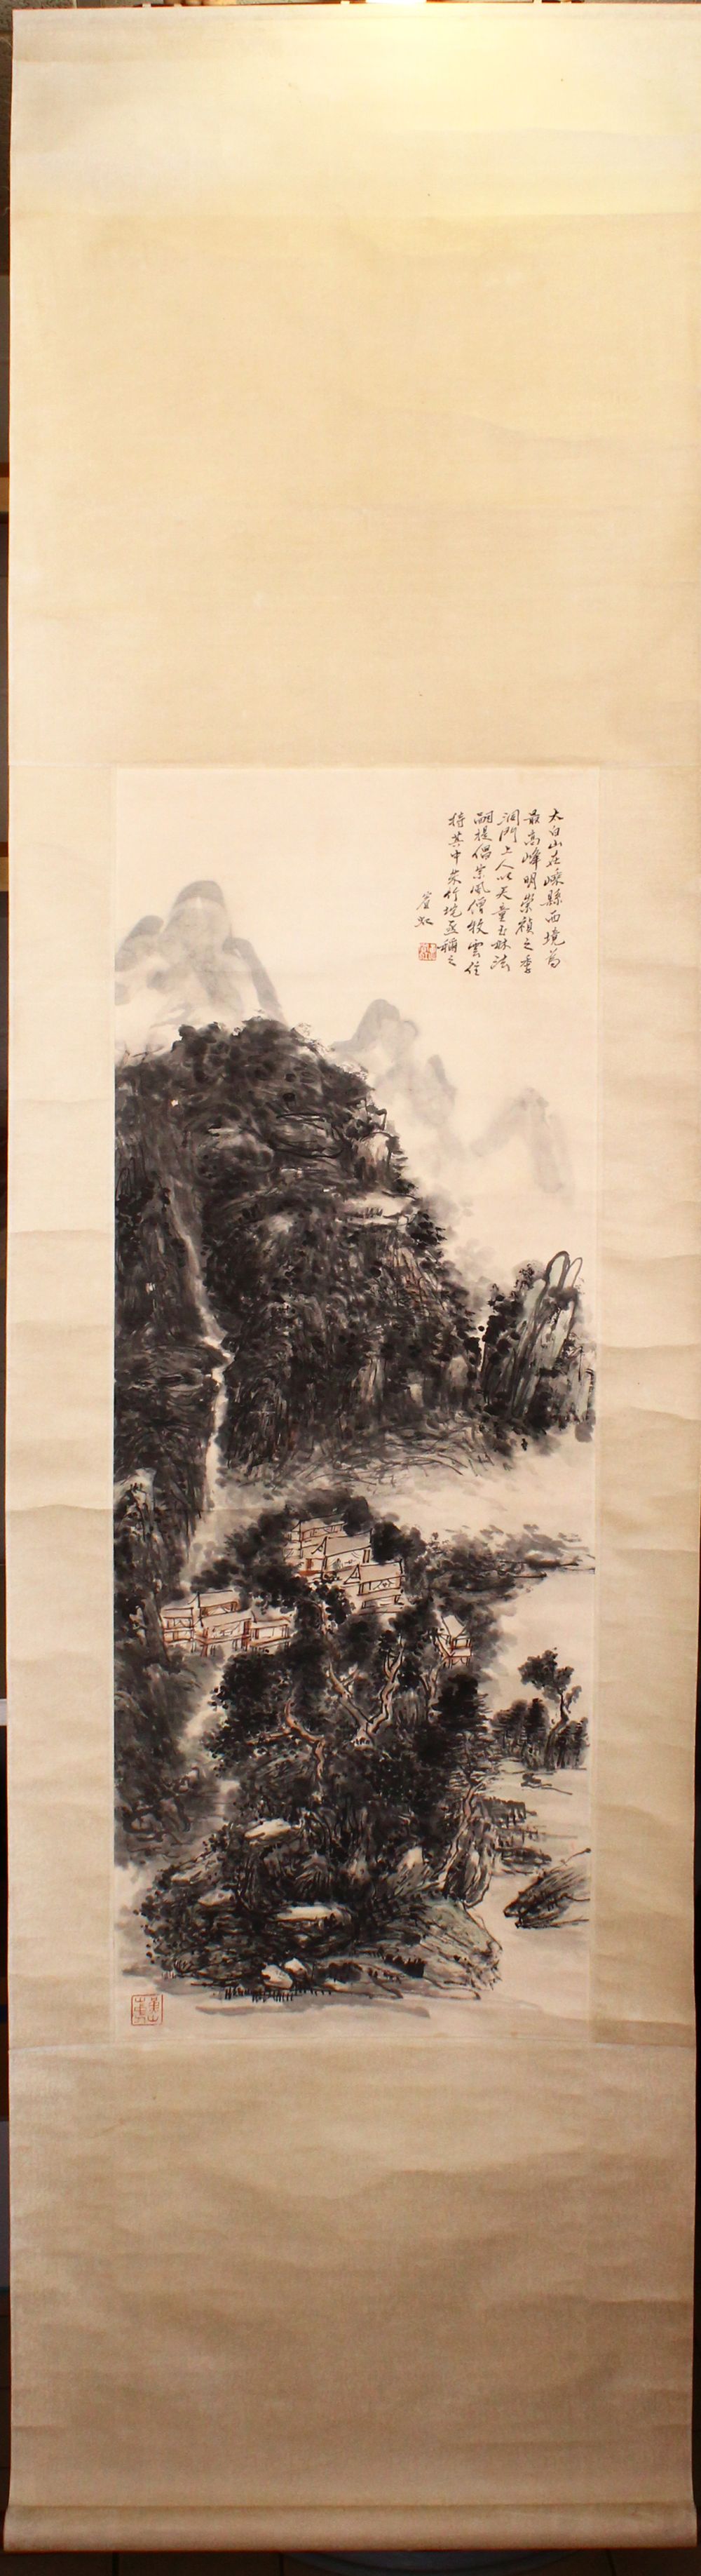 A 20TH CENTURY CHINESE SCROLL PAINTING, depicting a mountainous landscape, image 112cm x 42cm. - Image 2 of 4